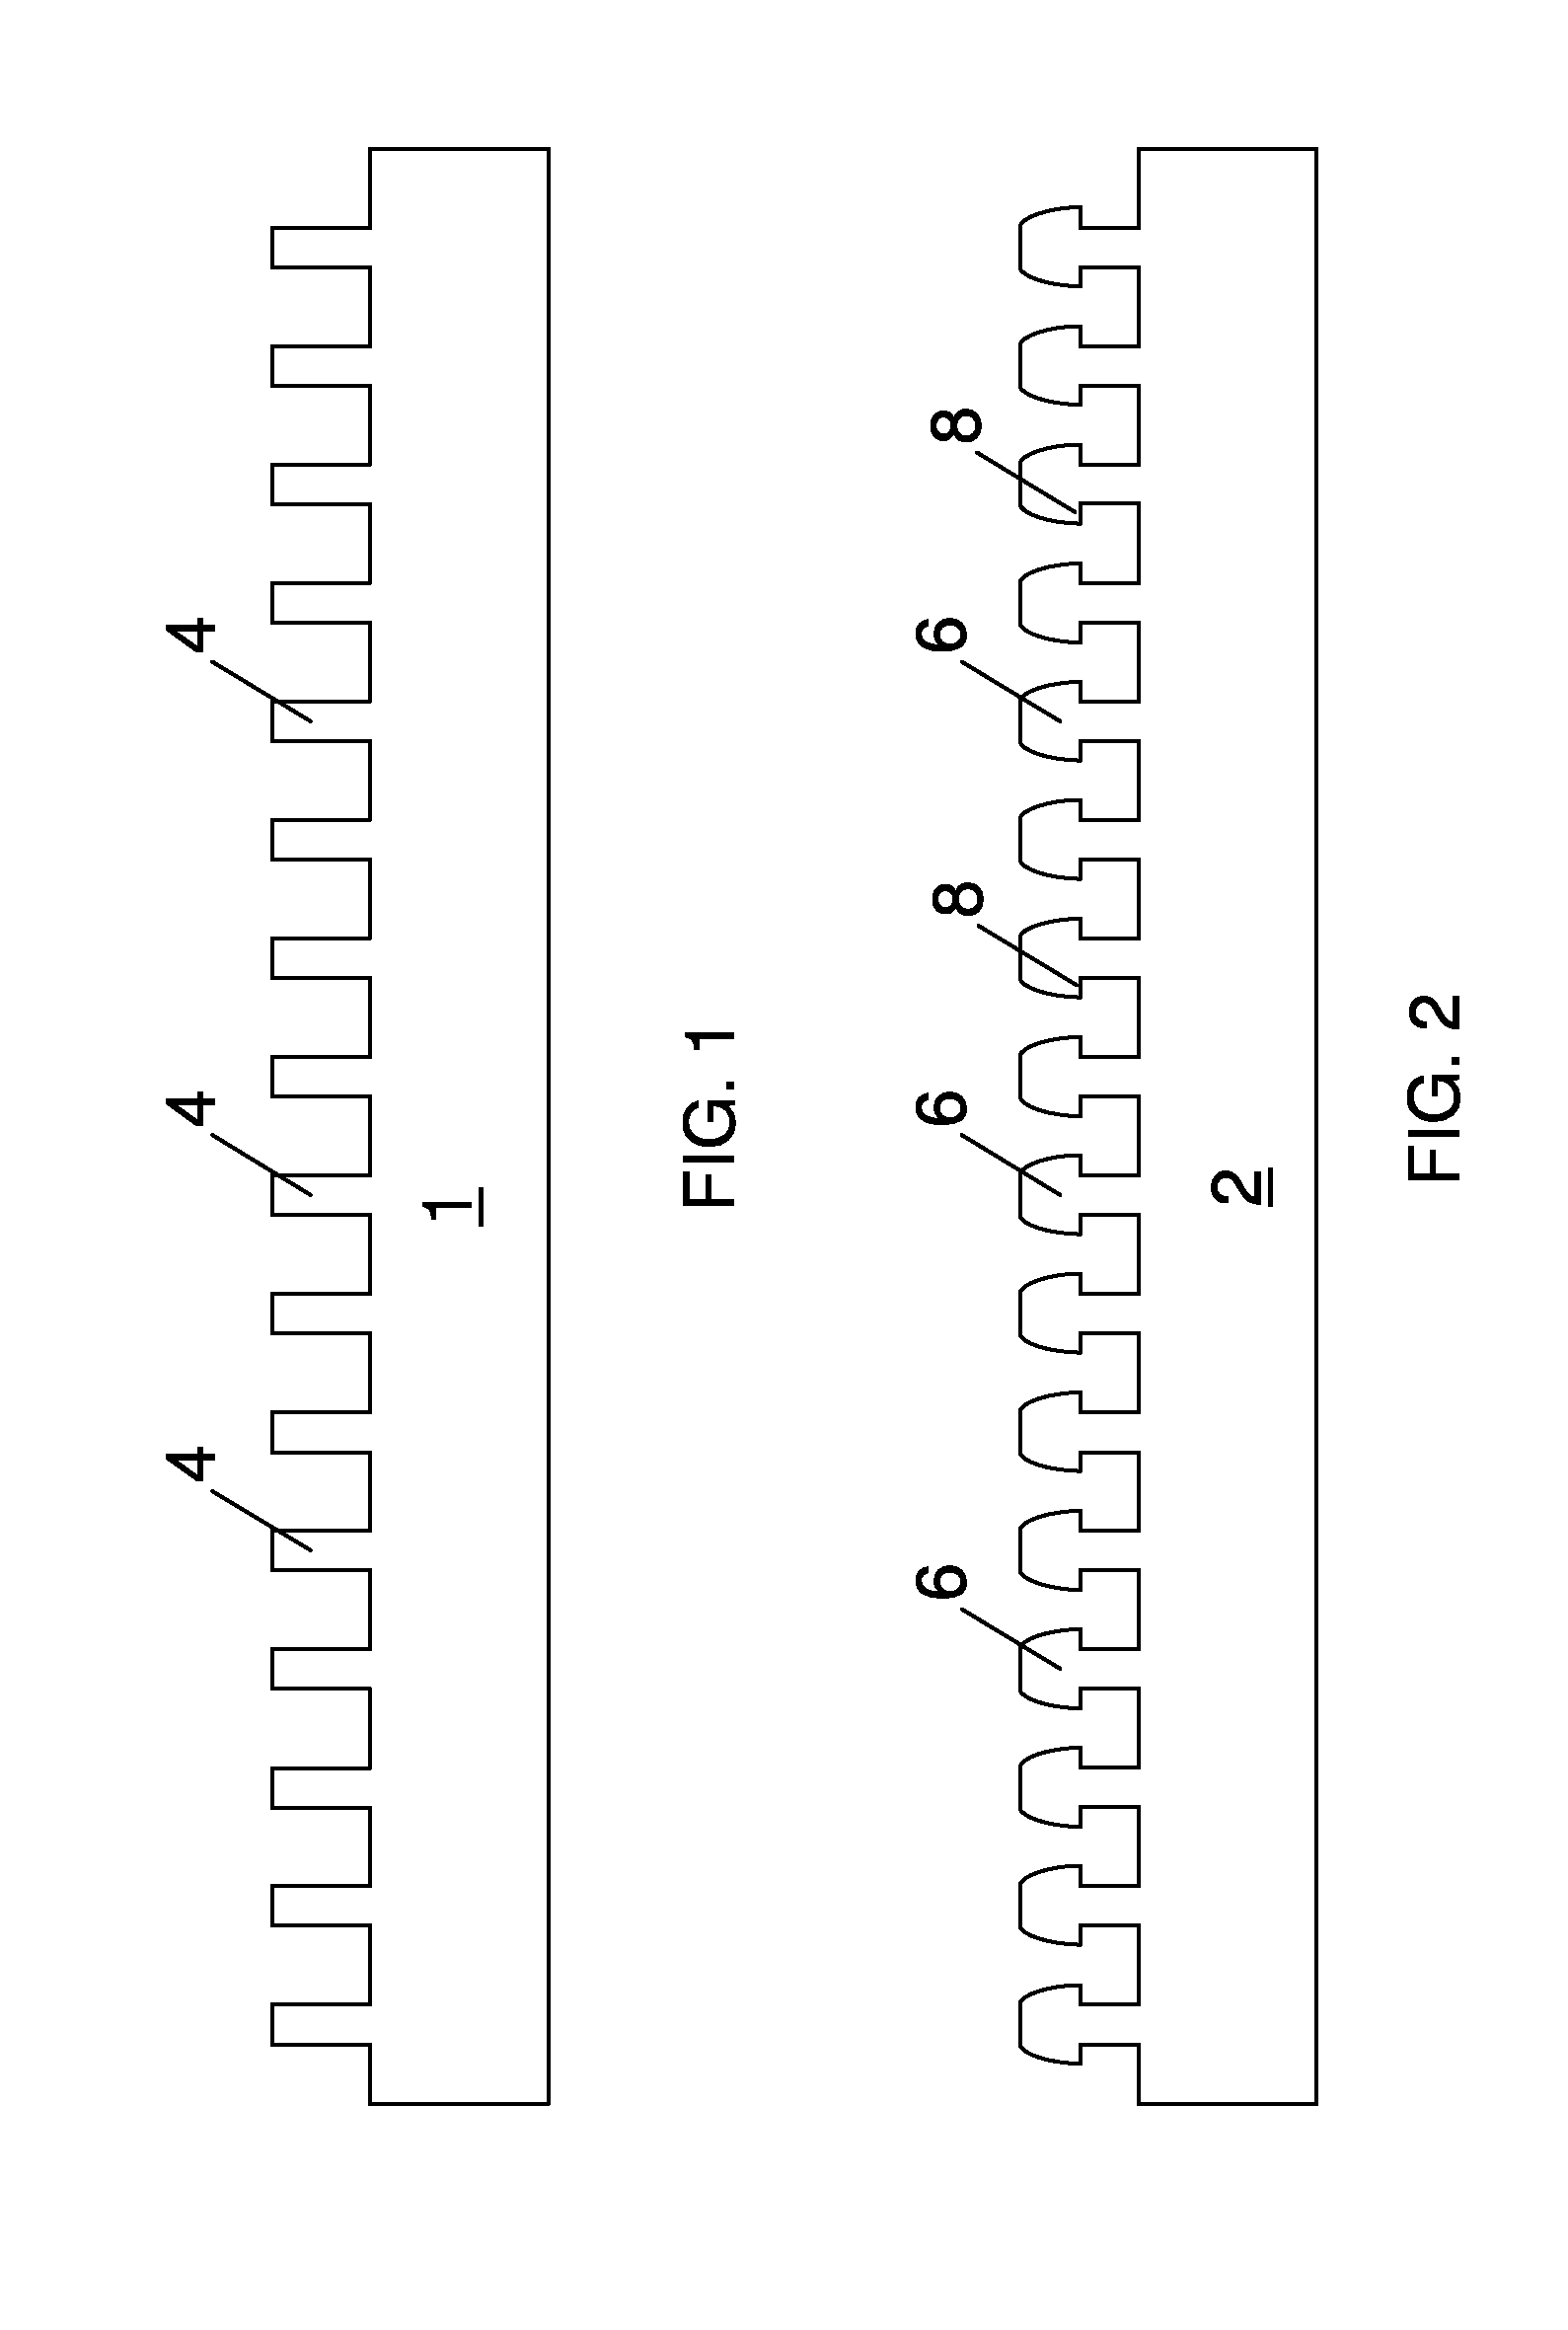 Process for Producing Shaped Metal Bodies Having a Structured Surface